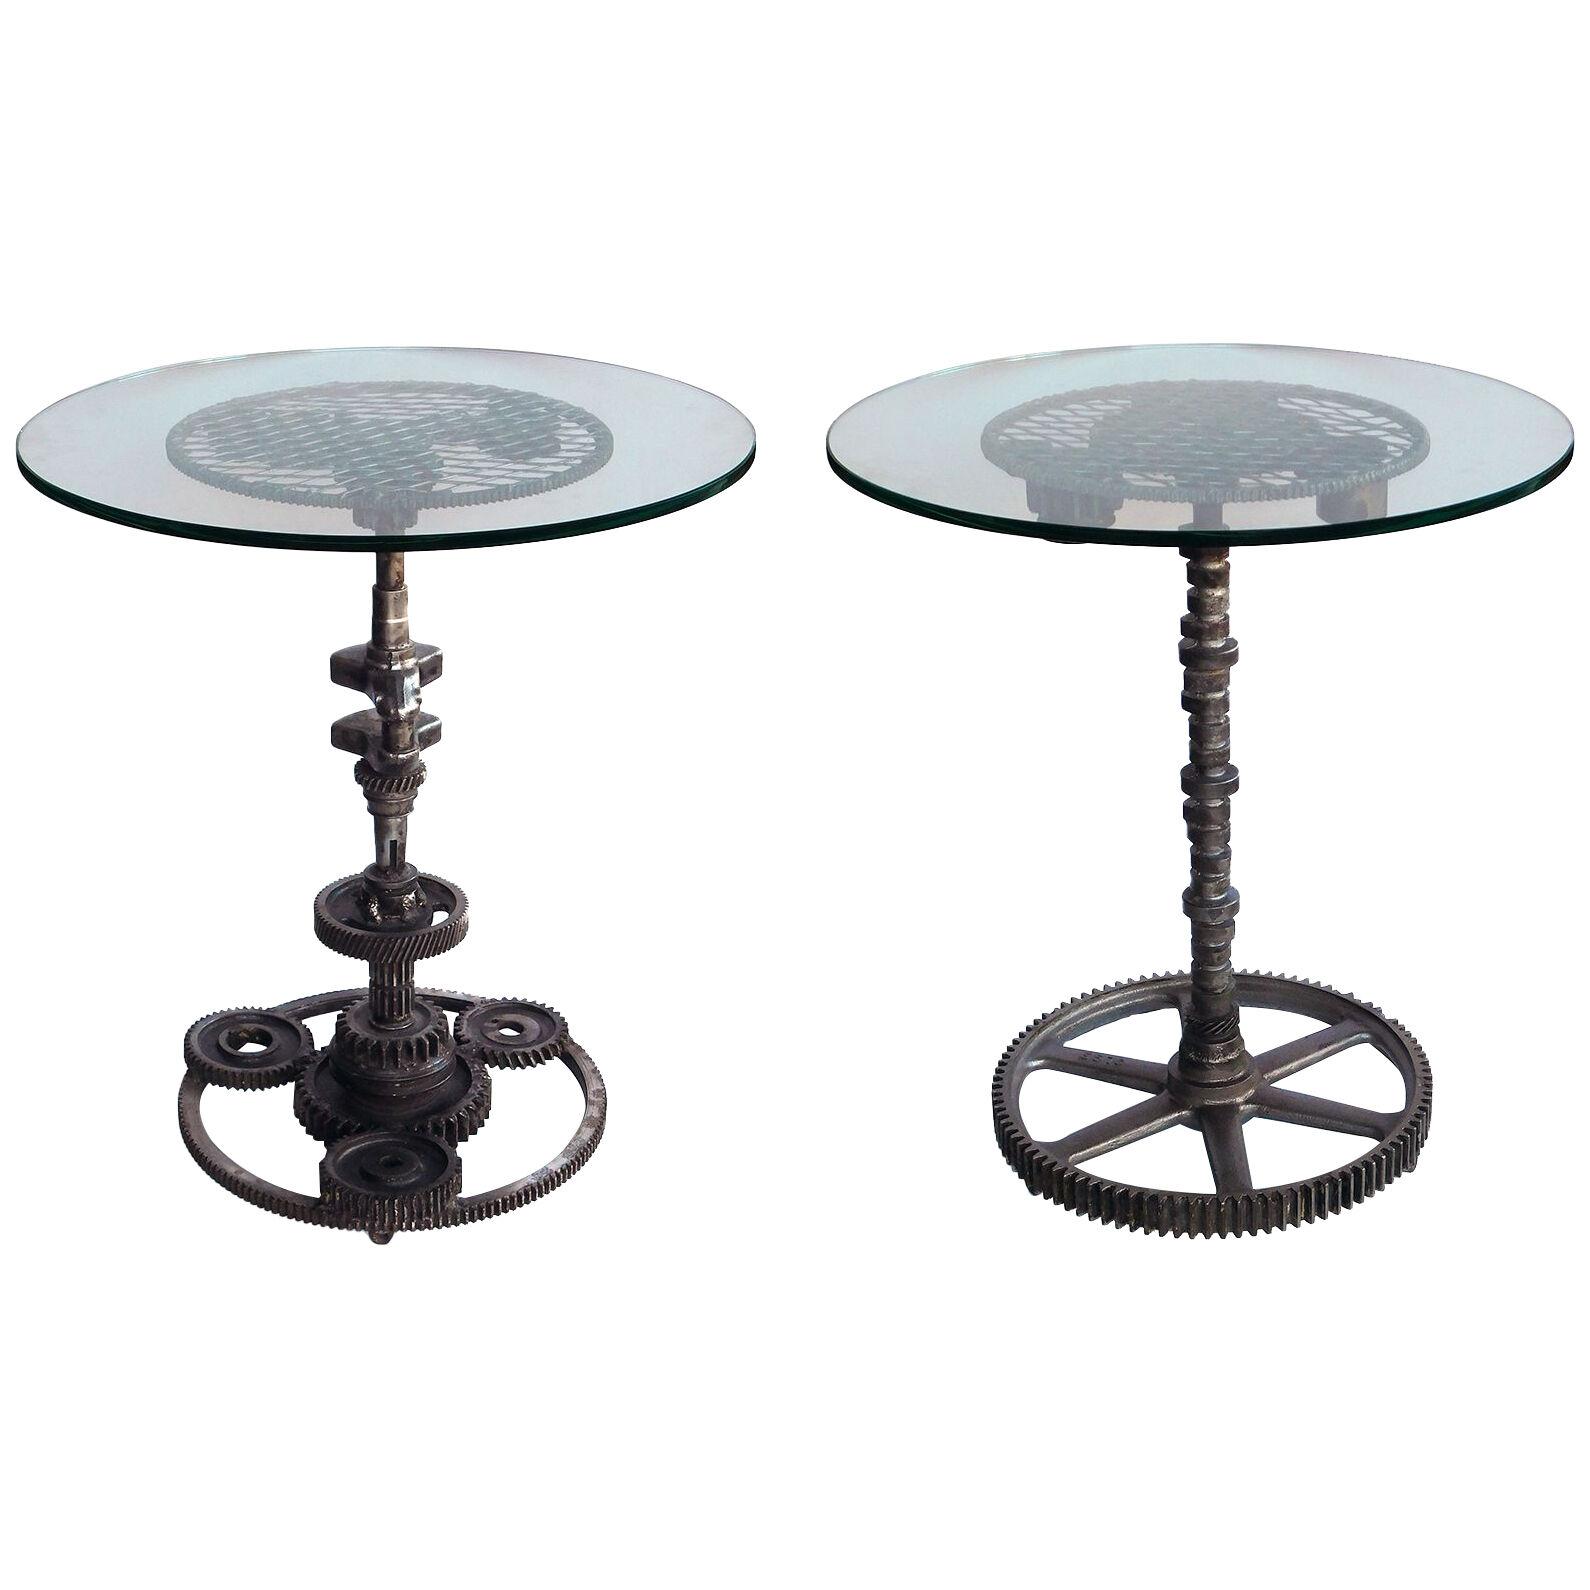 Pair of industrial cast iron wheel tables with circular glass tops